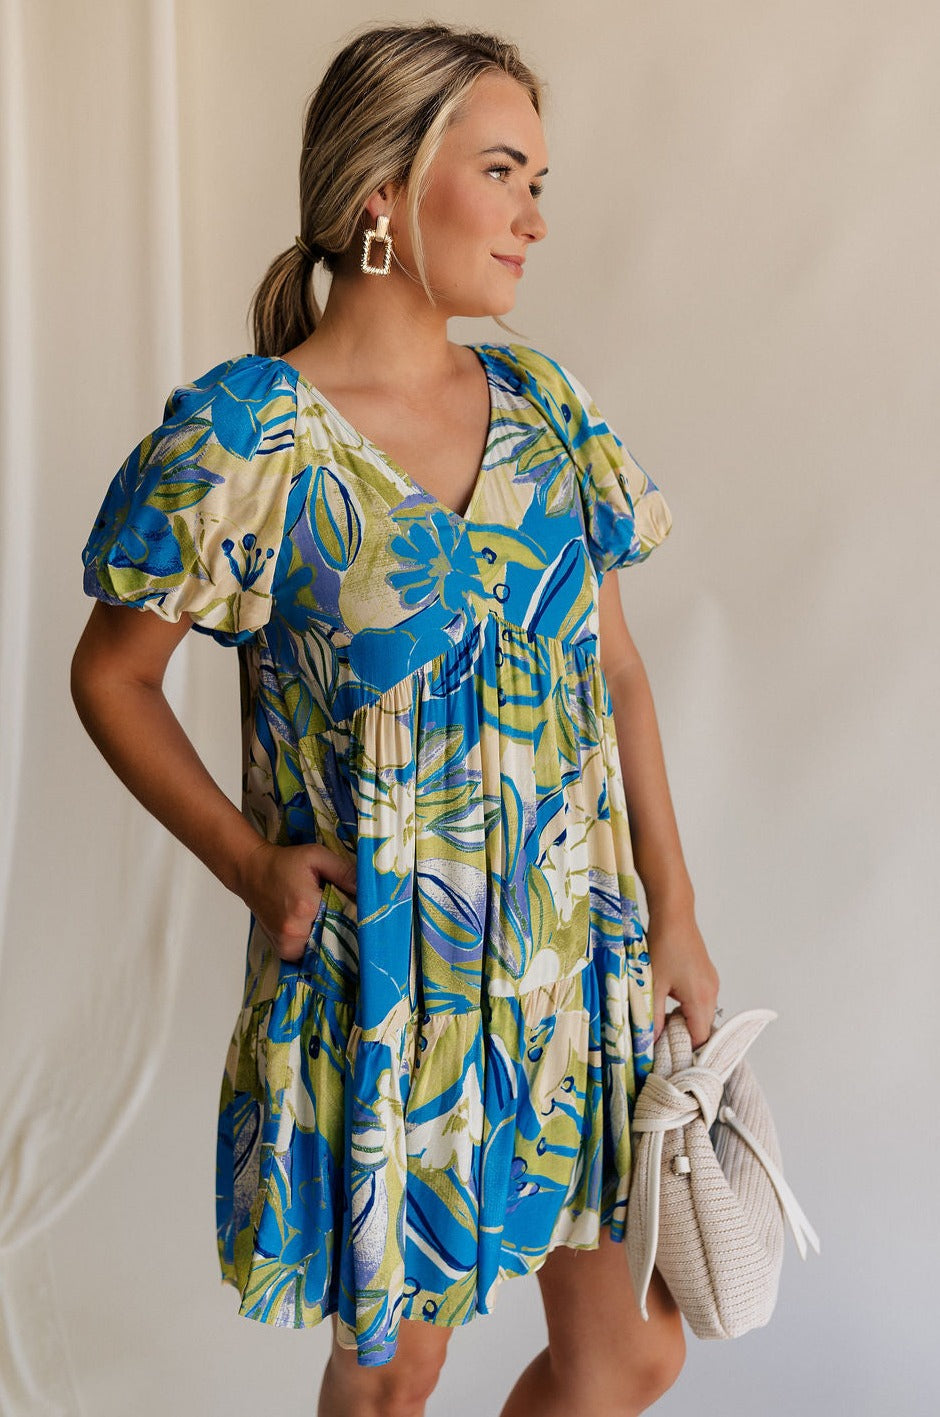 Side view of female model wearing the Tessa Blue & Lime Green Floral Mini Dress which features Blue, Green and White Light Weight Fabric, Floral Print, Mini Length, Tiered Body, Blue Lining, V-Neckline and Short Puff Sleeves